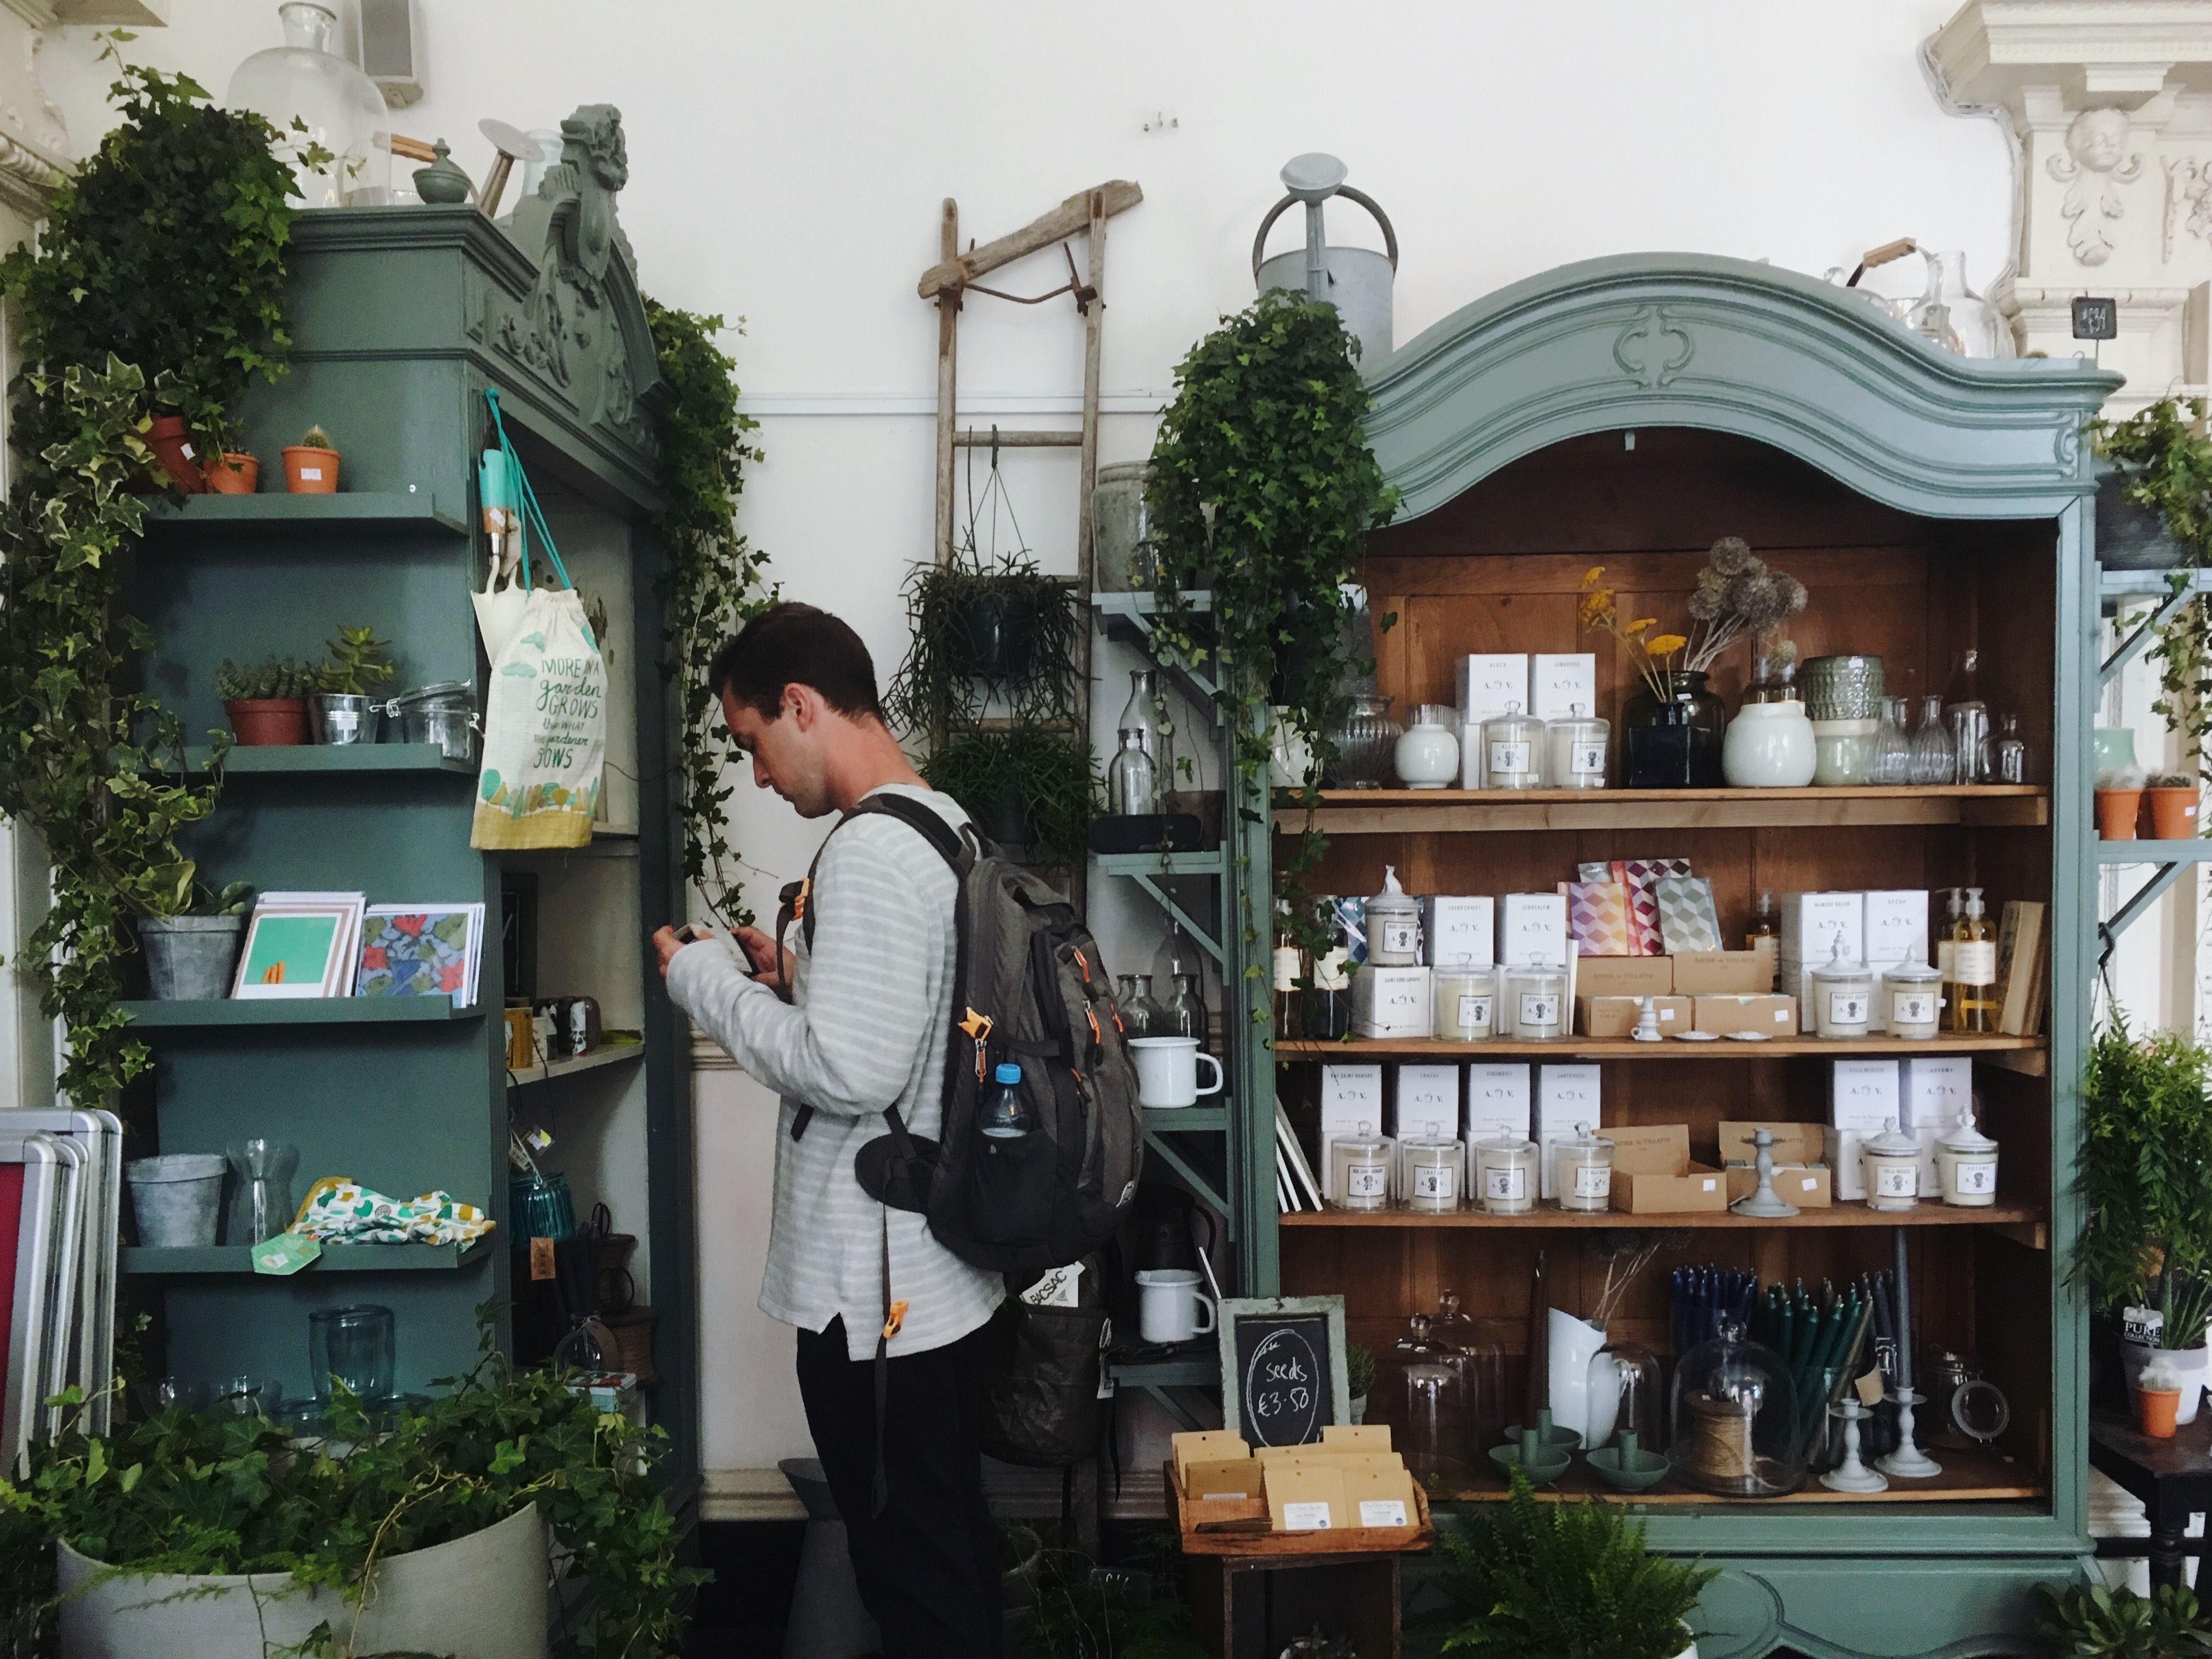 Man with a backpack shopping in a garden store